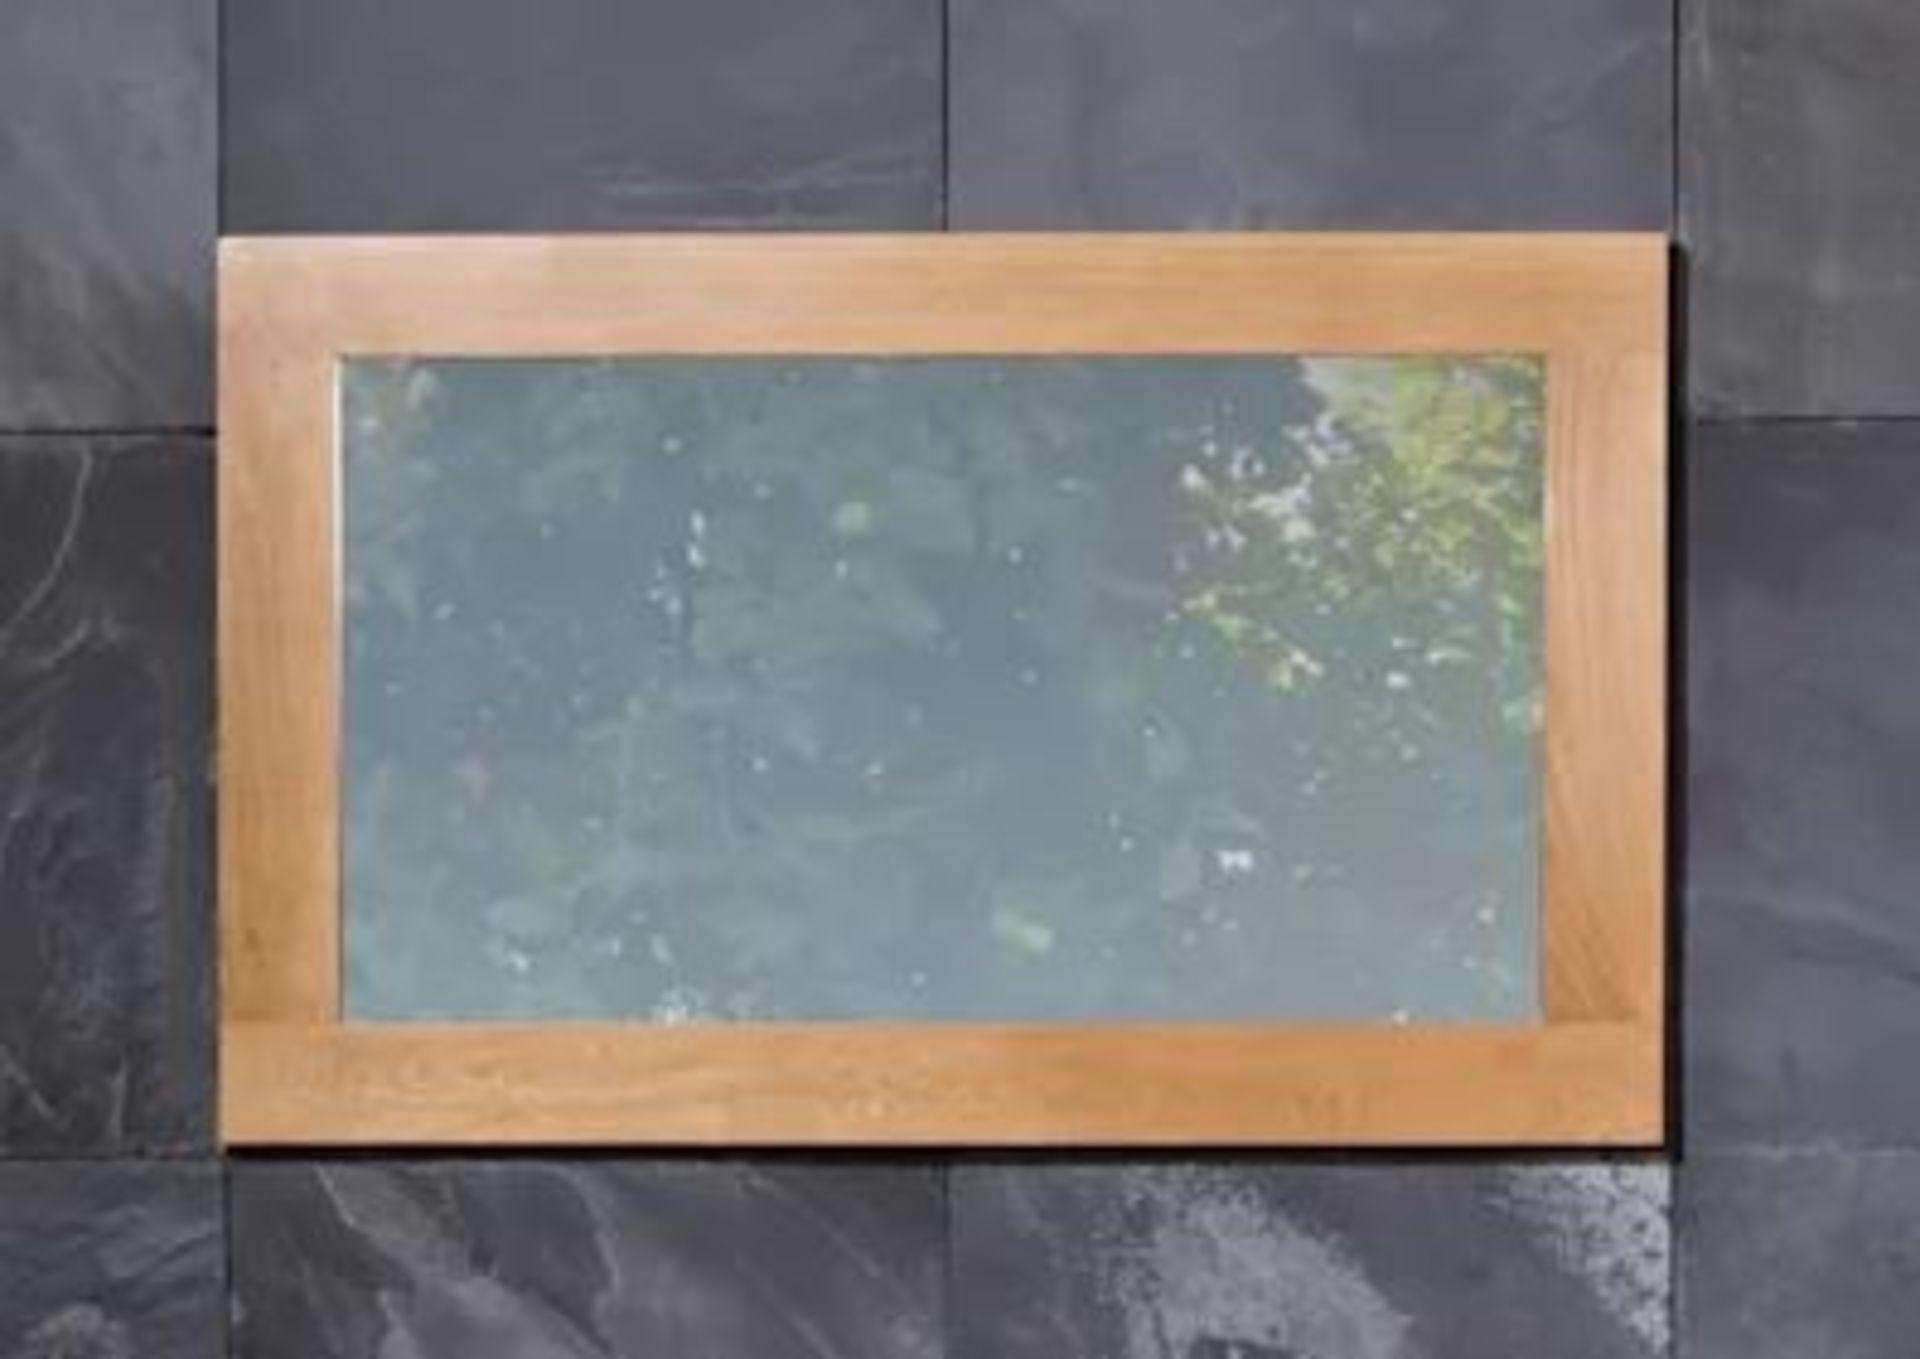 1 x Stonearth Medium Wall Mirror Frame - American Solid Oak Frame For Mirrors or Pictures - Image 3 of 12